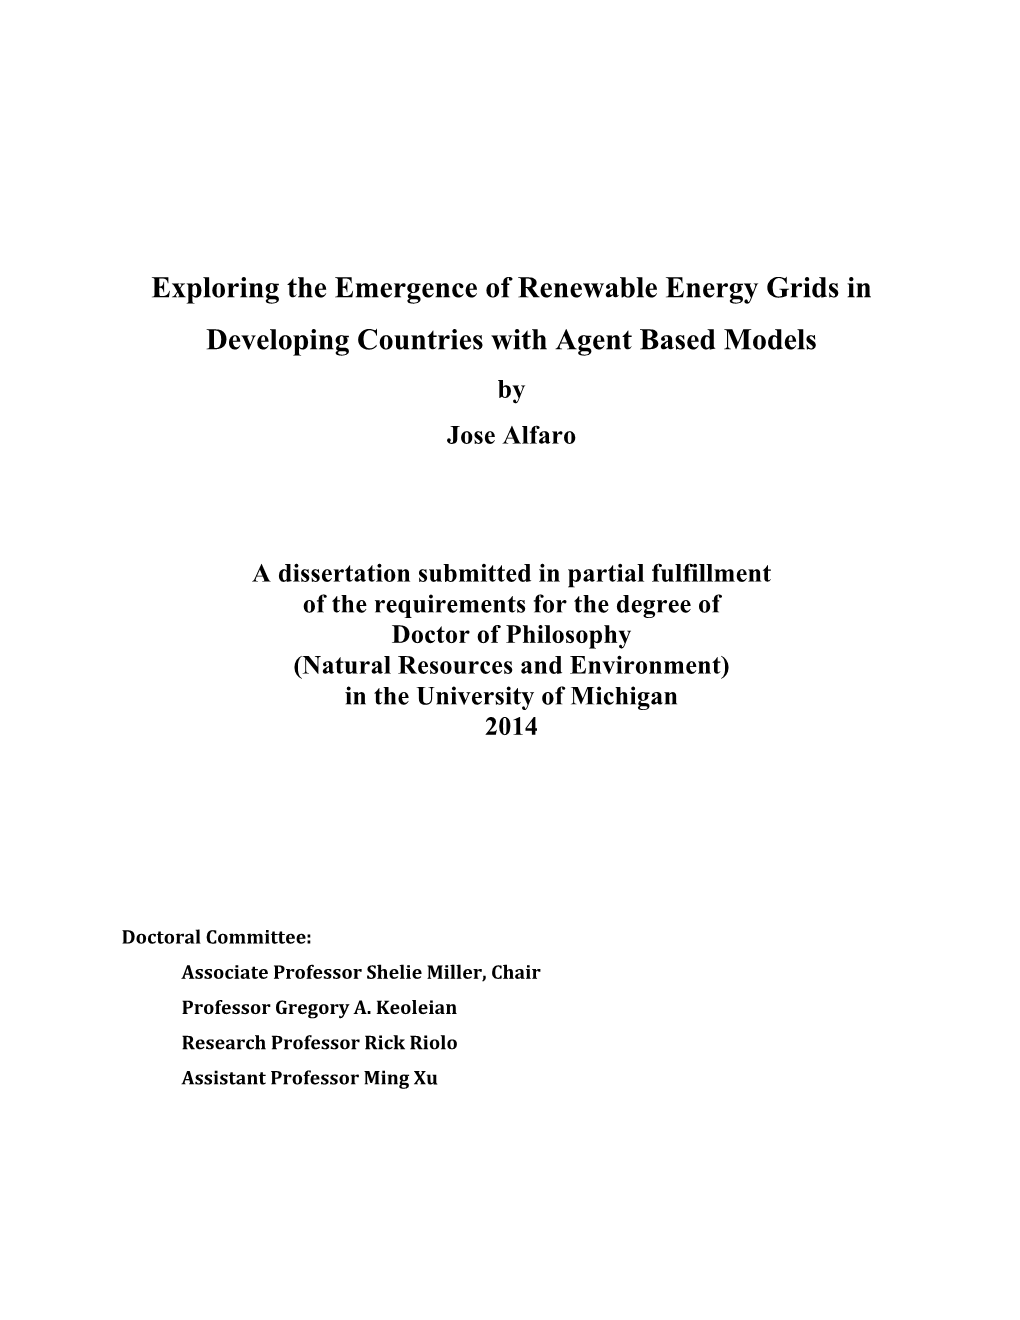 Exploring the Emergence of Renewable Energy Grids in Developing Countries with Agent Based Models by Jose Alfaro